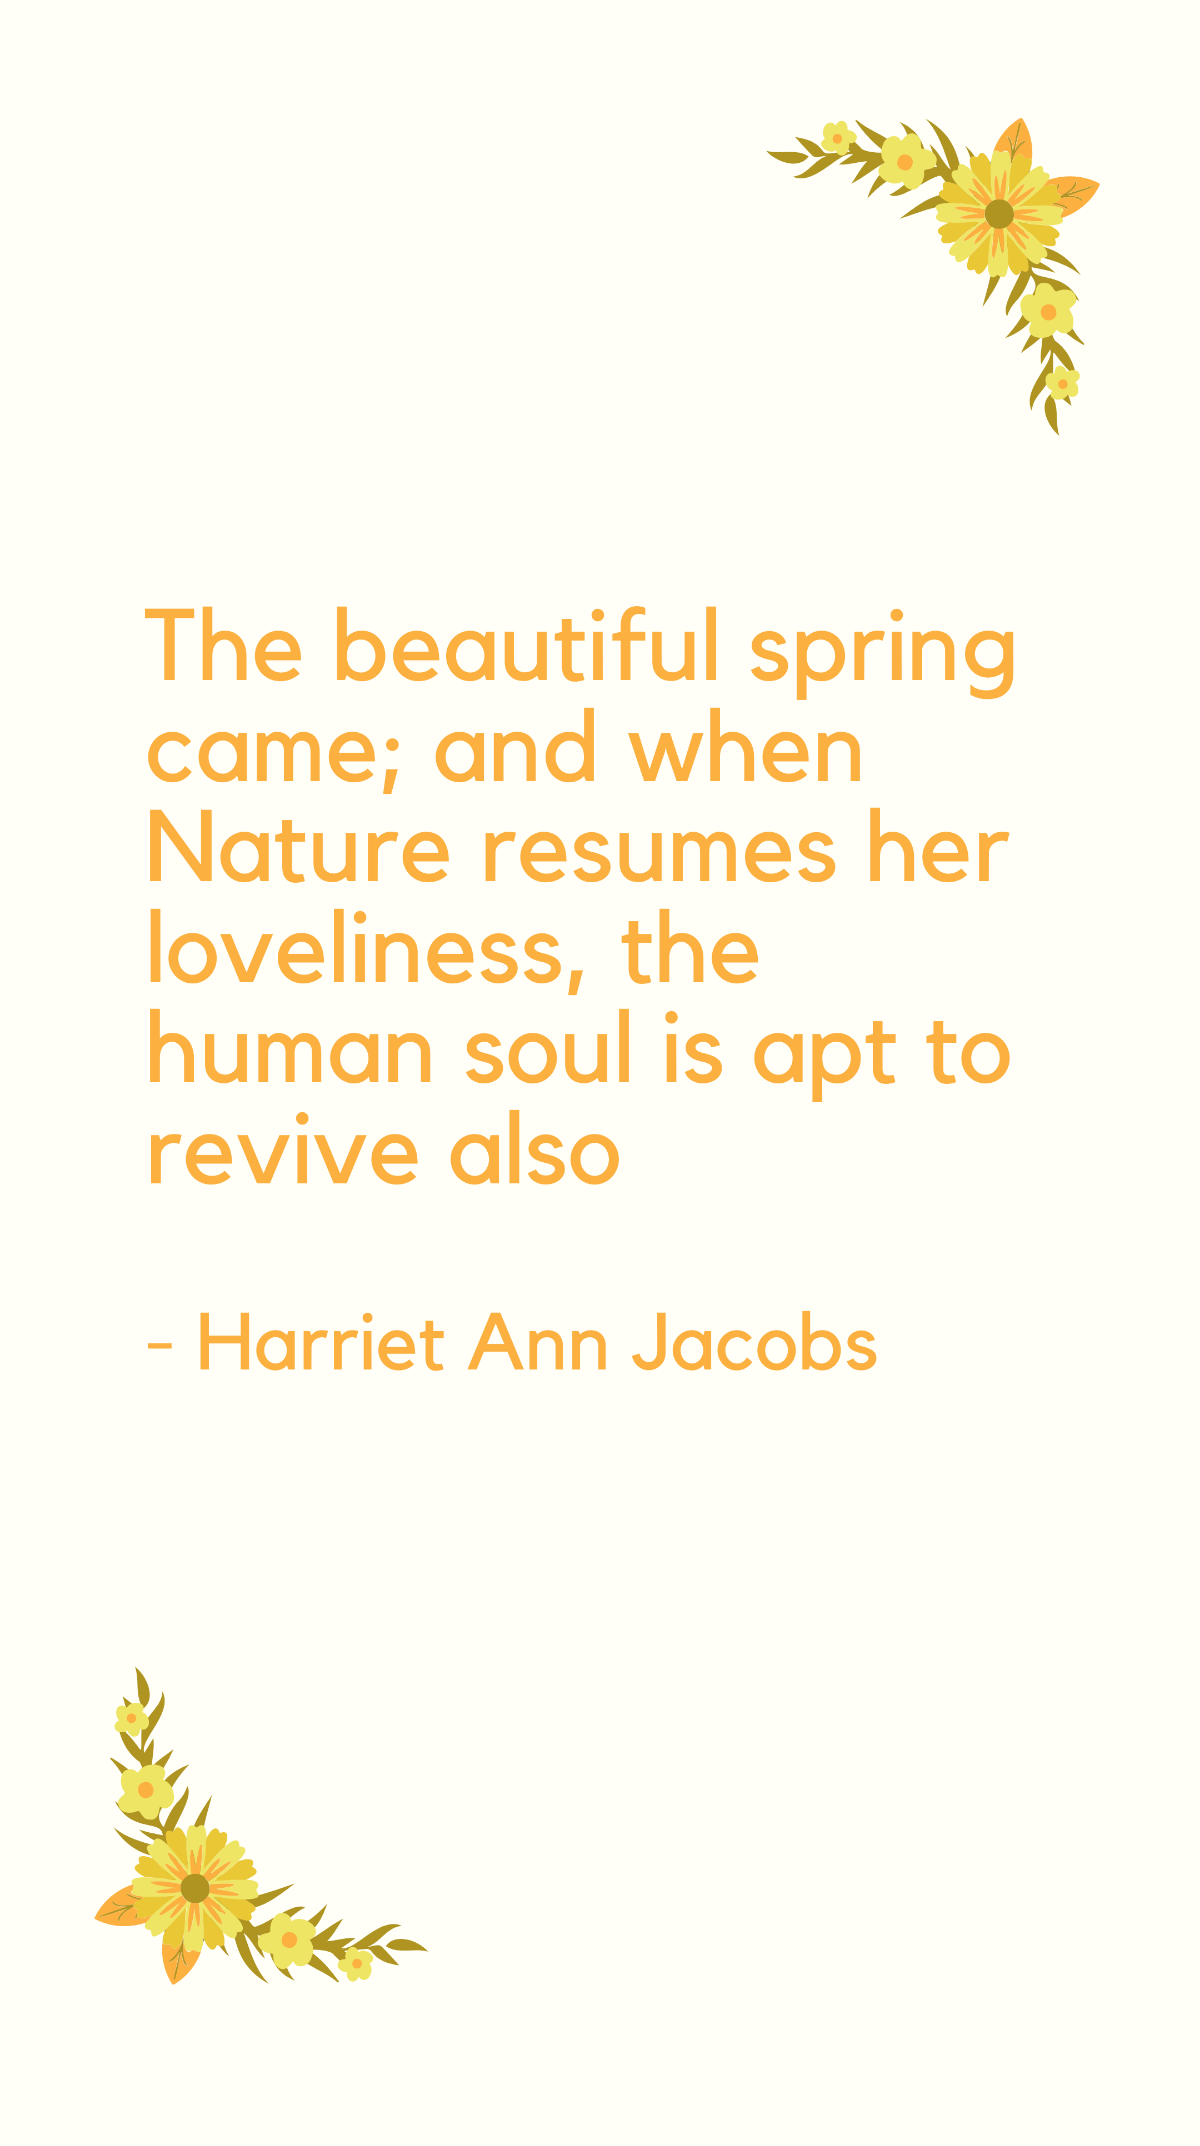 Harriet Ann Jacobs - The beautiful spring came; and when Nature resumes her loveliness, the human soul is apt to revive also